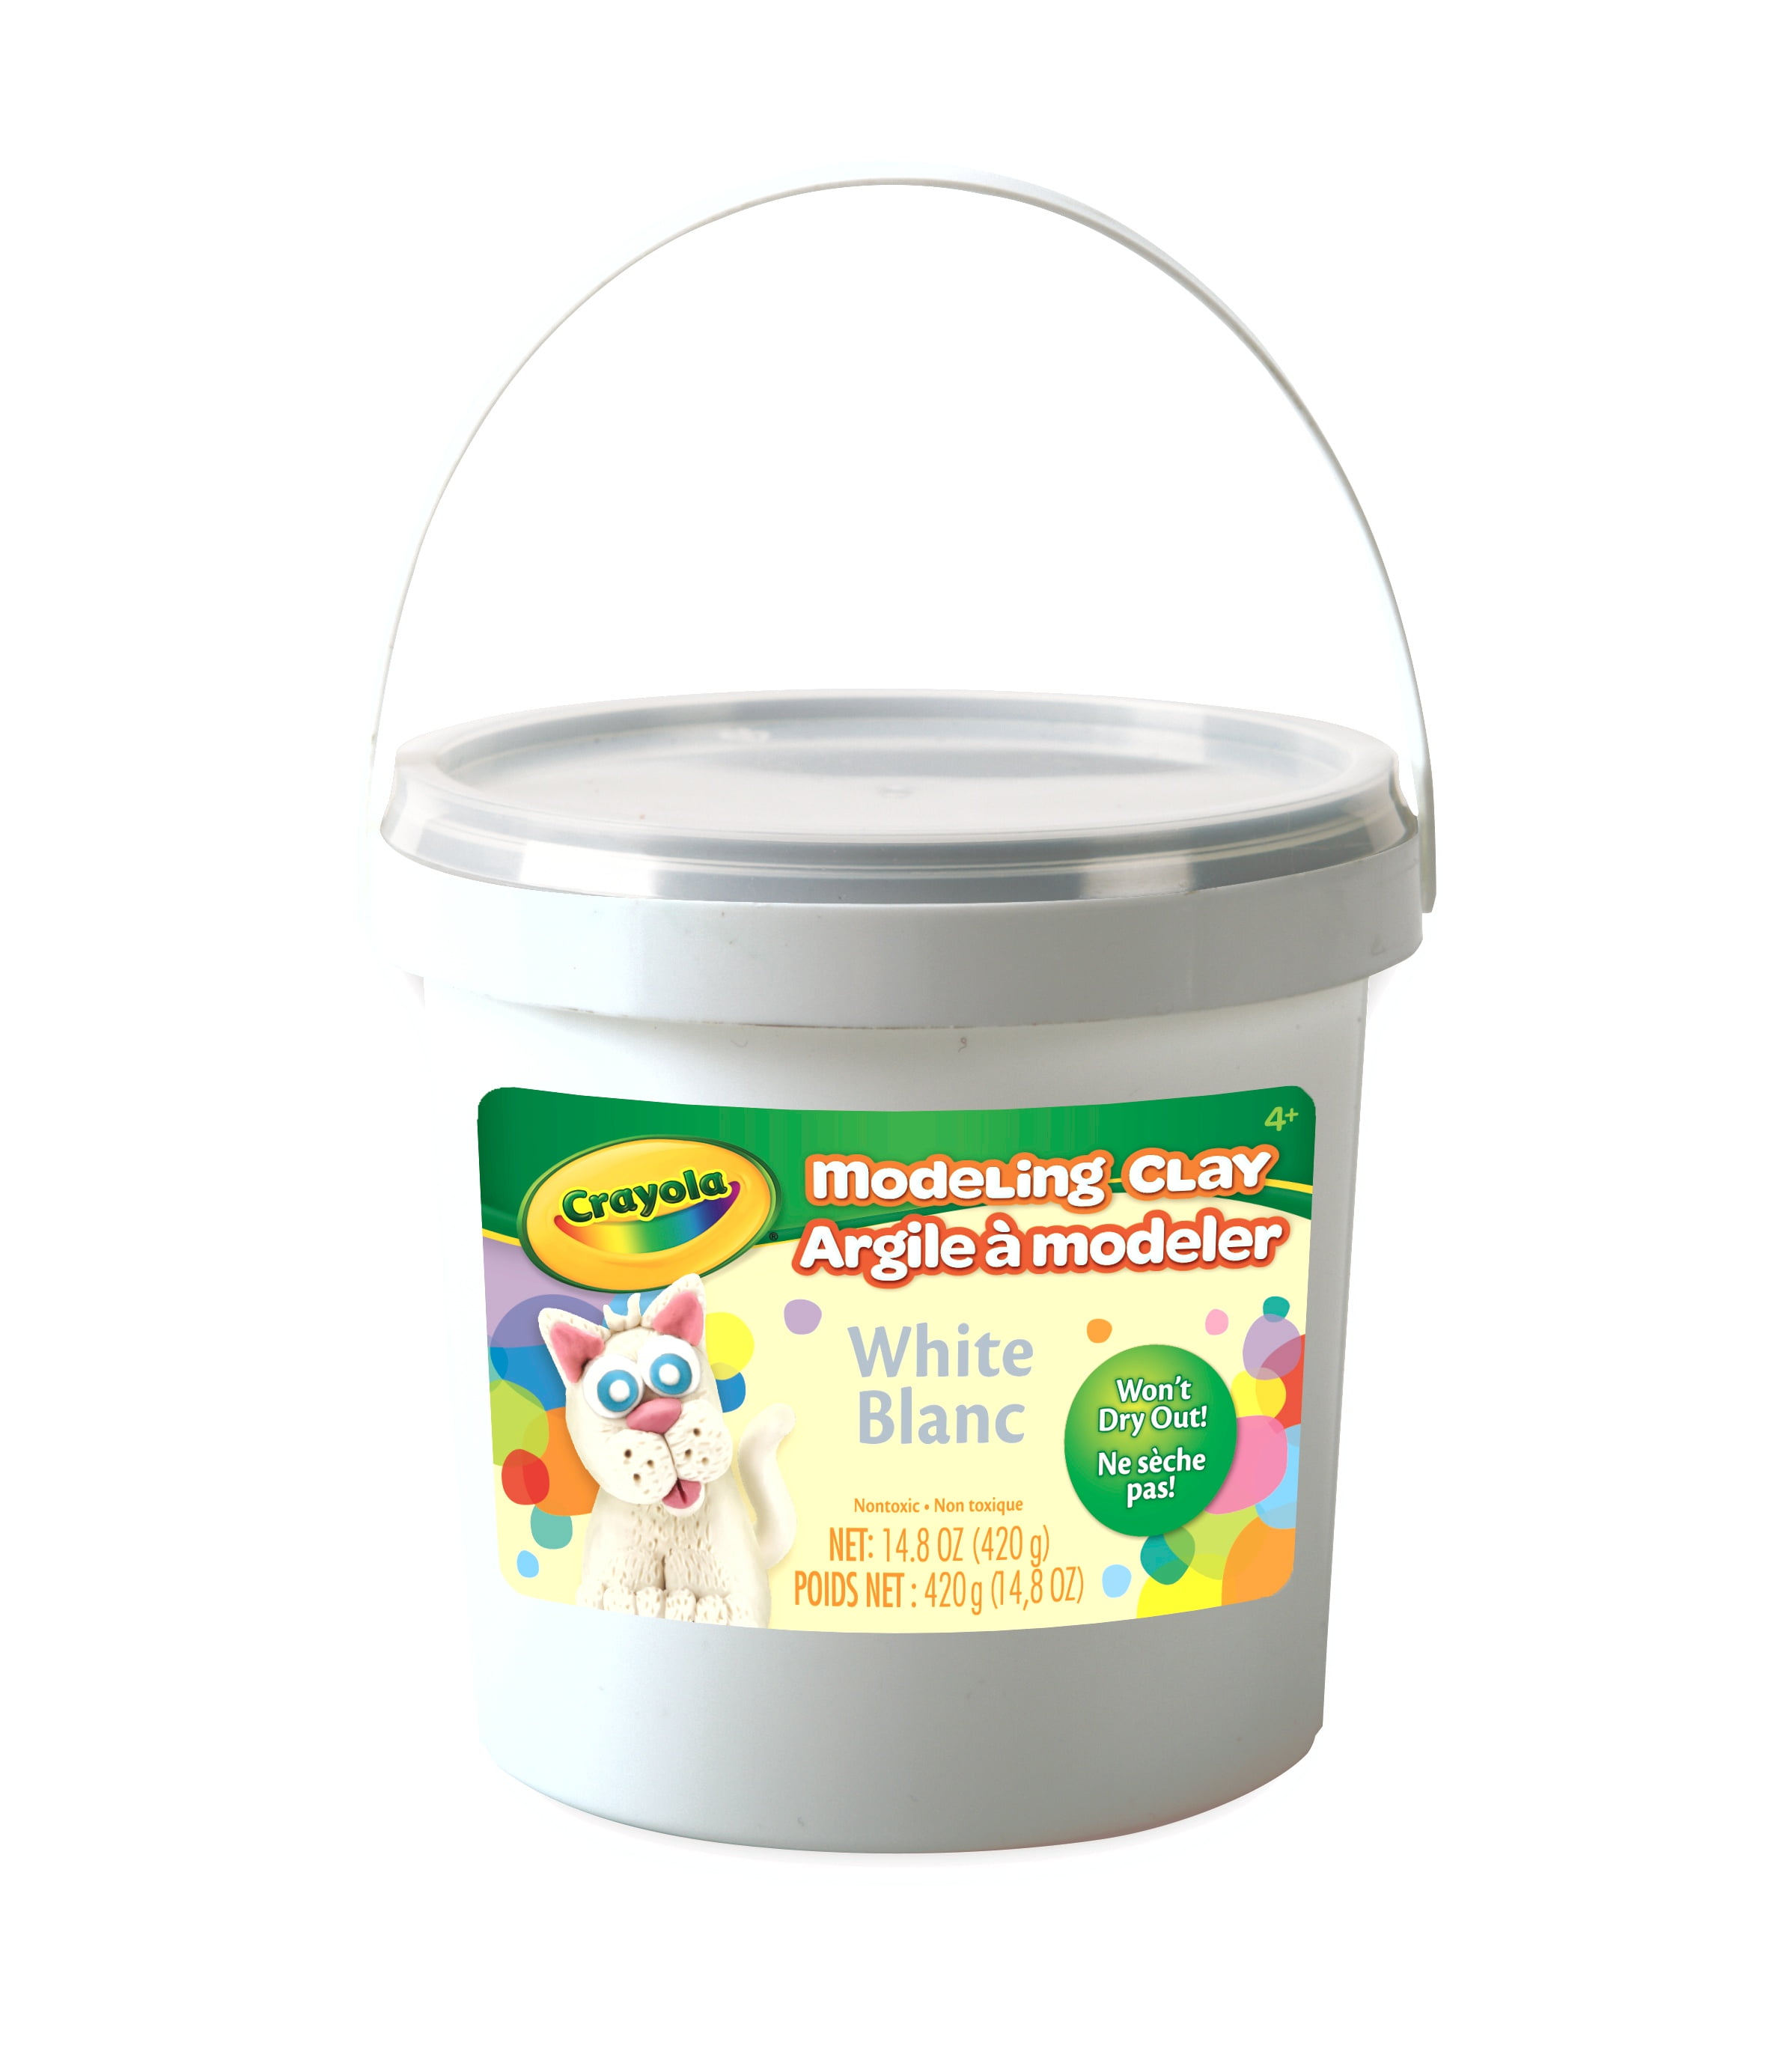 Crayola Air Dry Clay 5-Pound Bucket Only $5 on Walmart.com (Regularly $10)